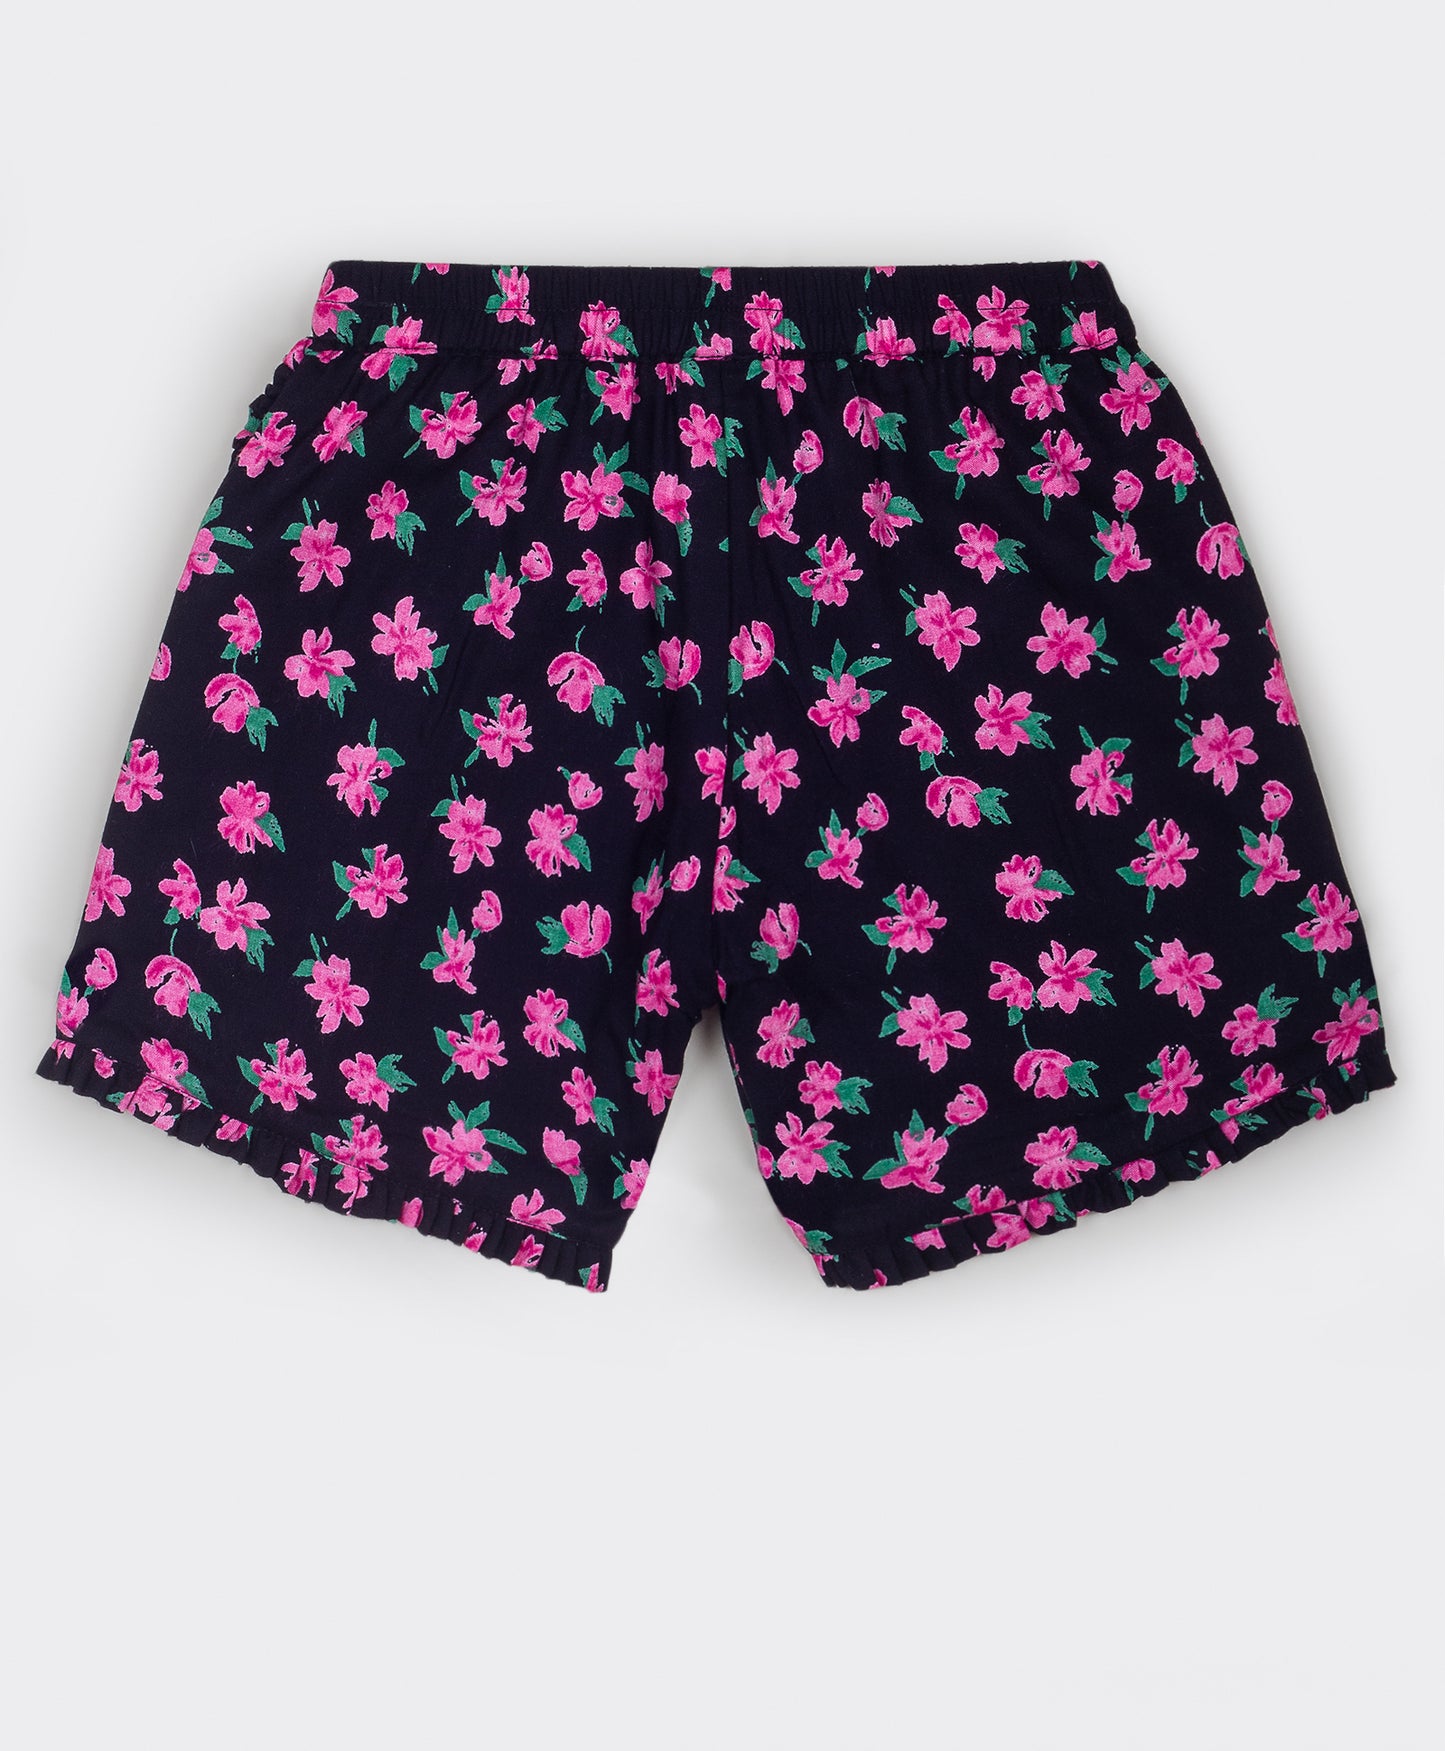 Black shorts with pink flower print all over